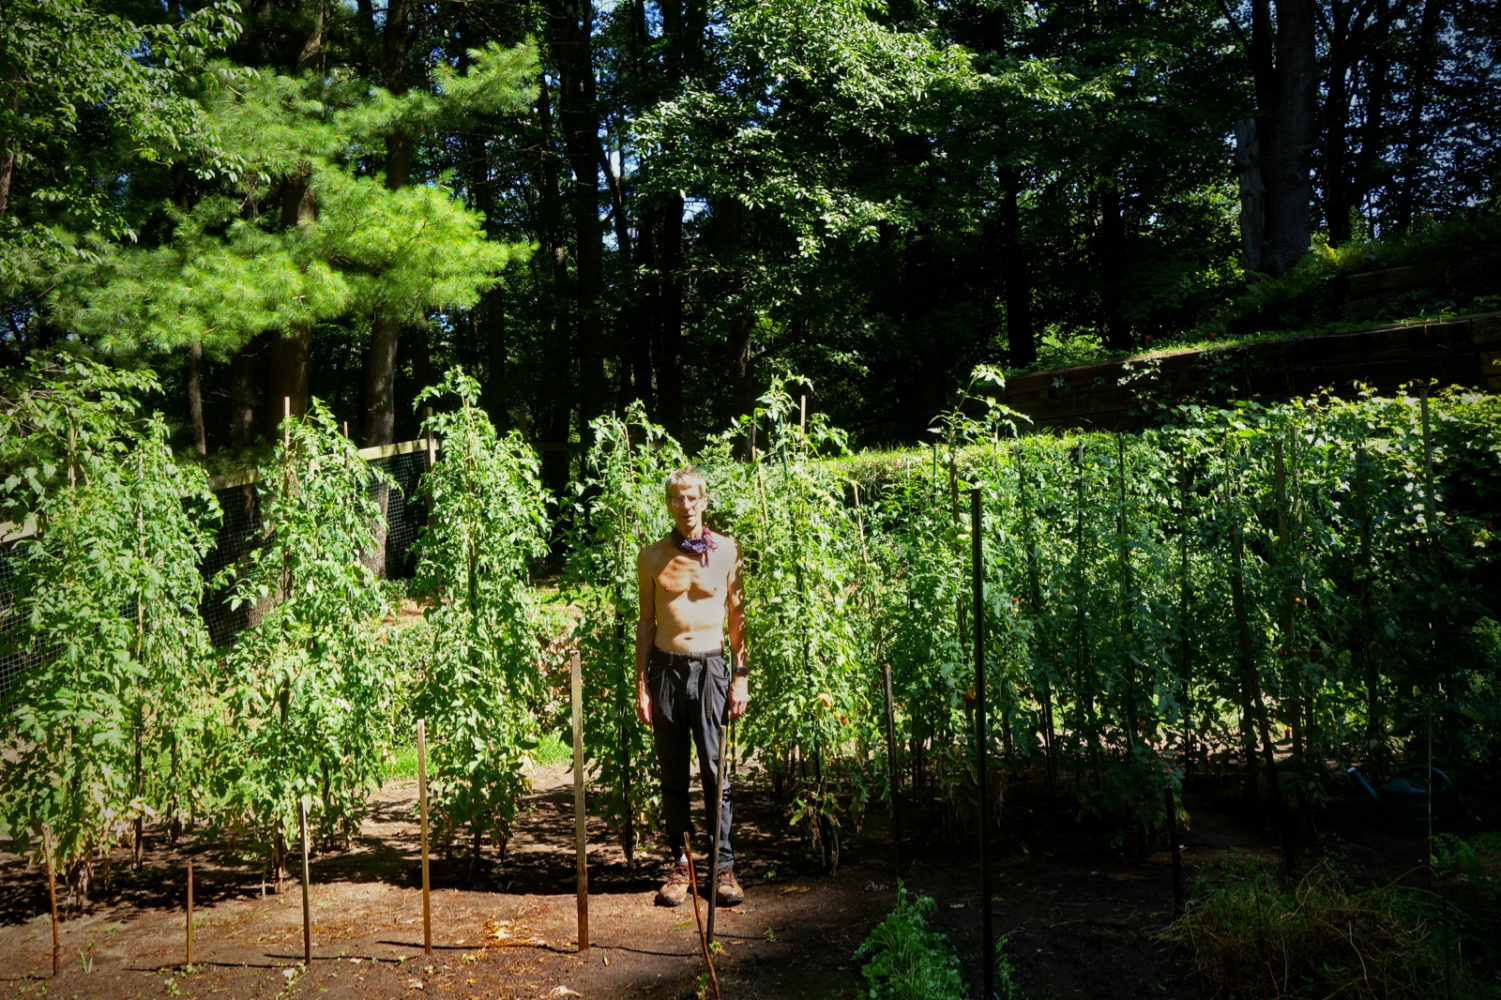 Paul as gauge of height of tomato plant. Photo by Peggi Fournier.